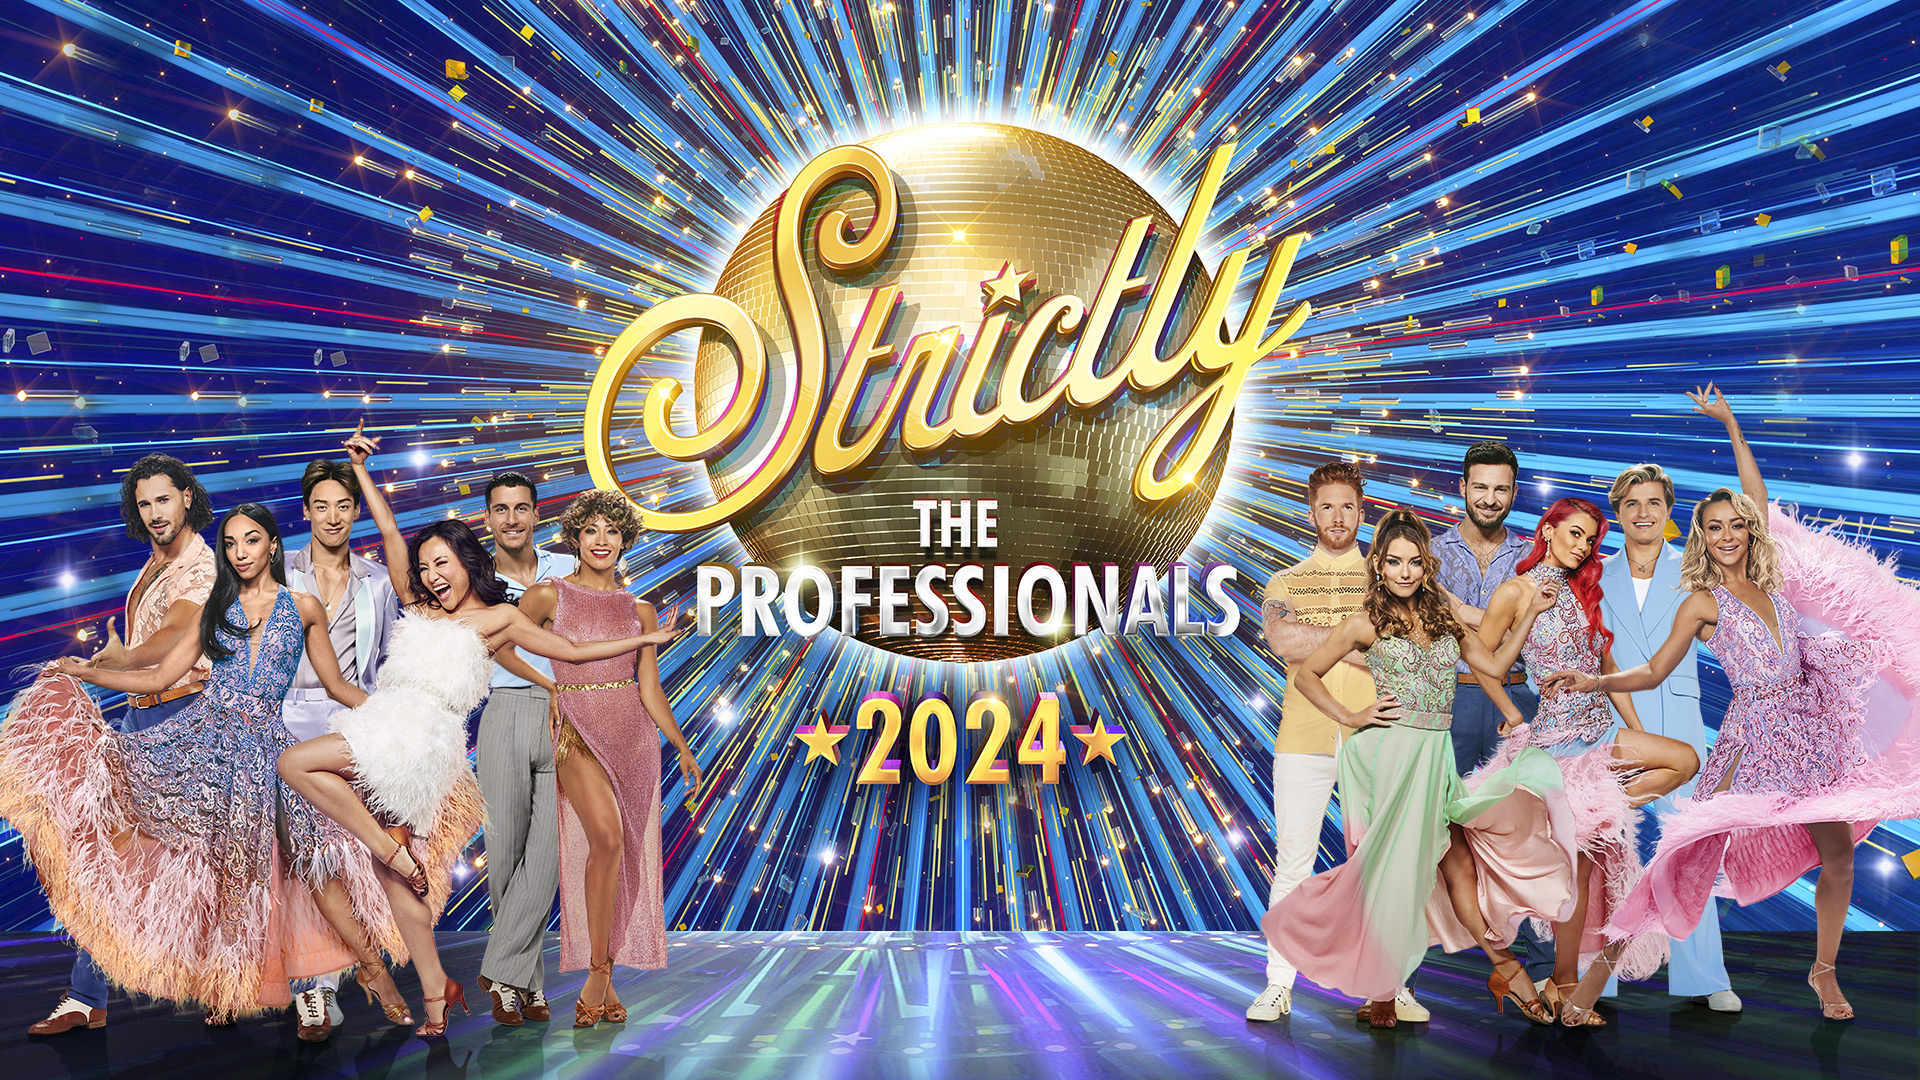 Strictly Come Dancing Professionals 2024 tour dates and line up